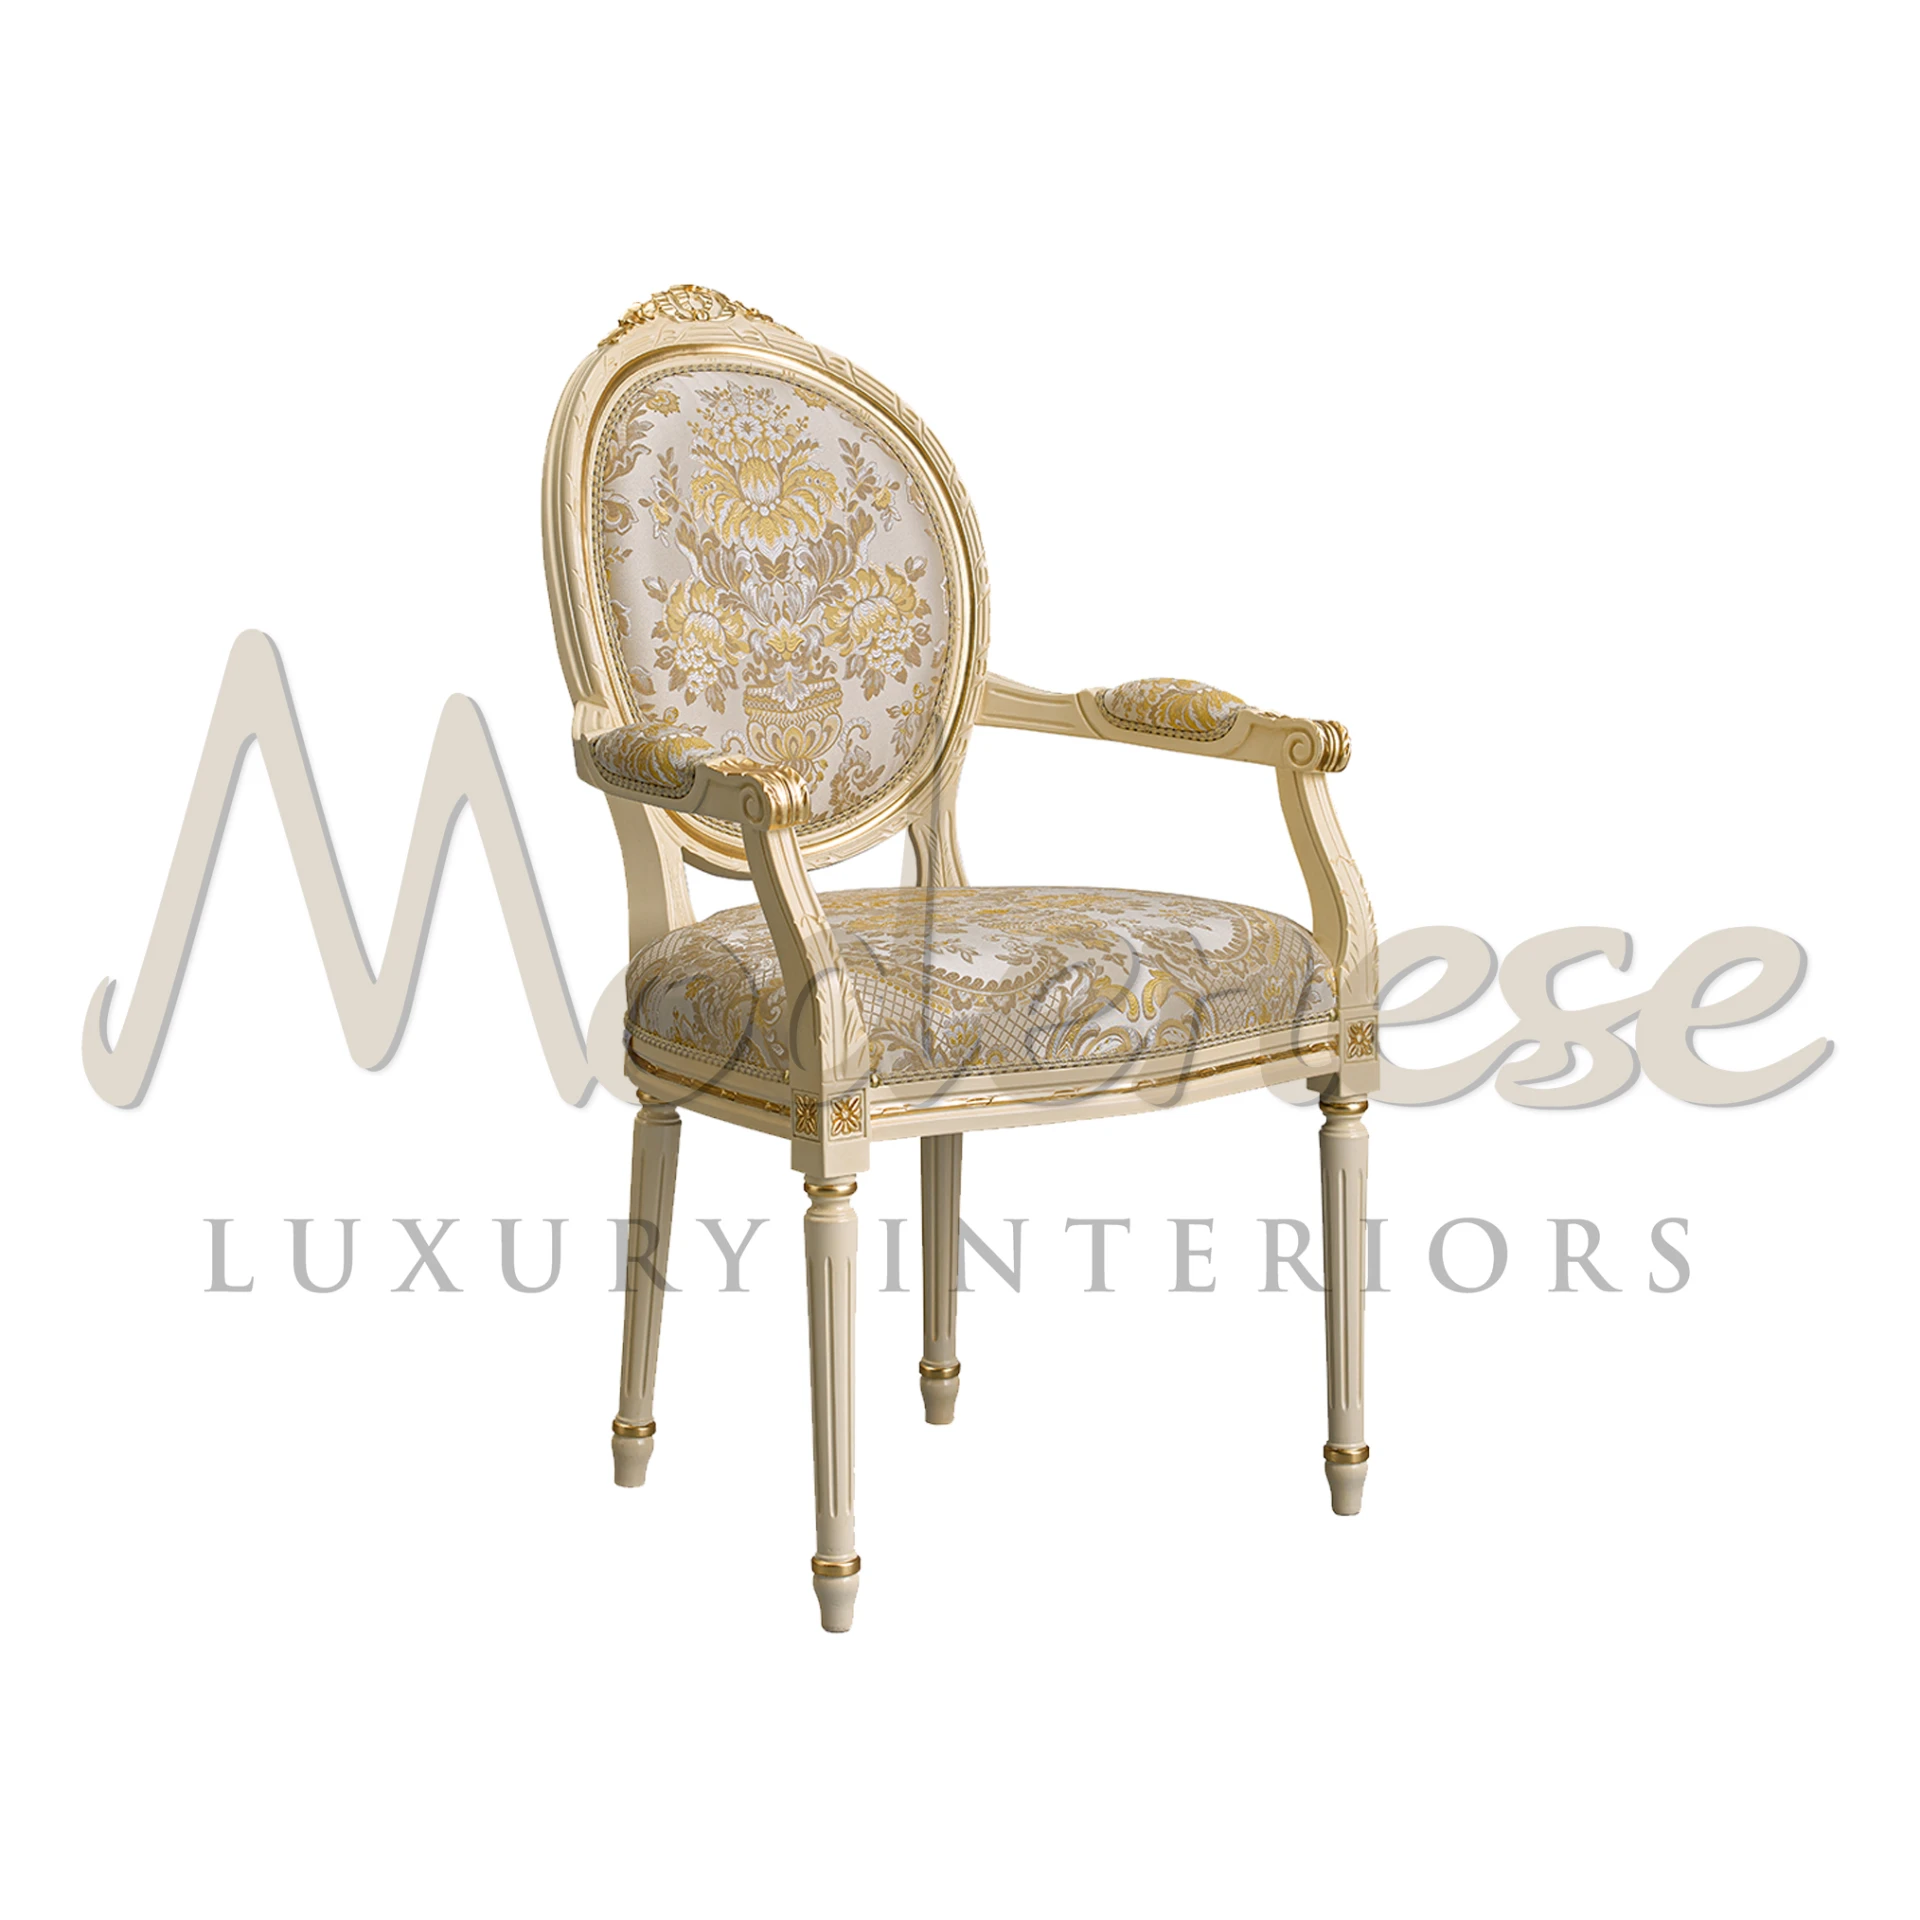 Hand Painted creme chair with elegant armrests and fancy floral patterns.